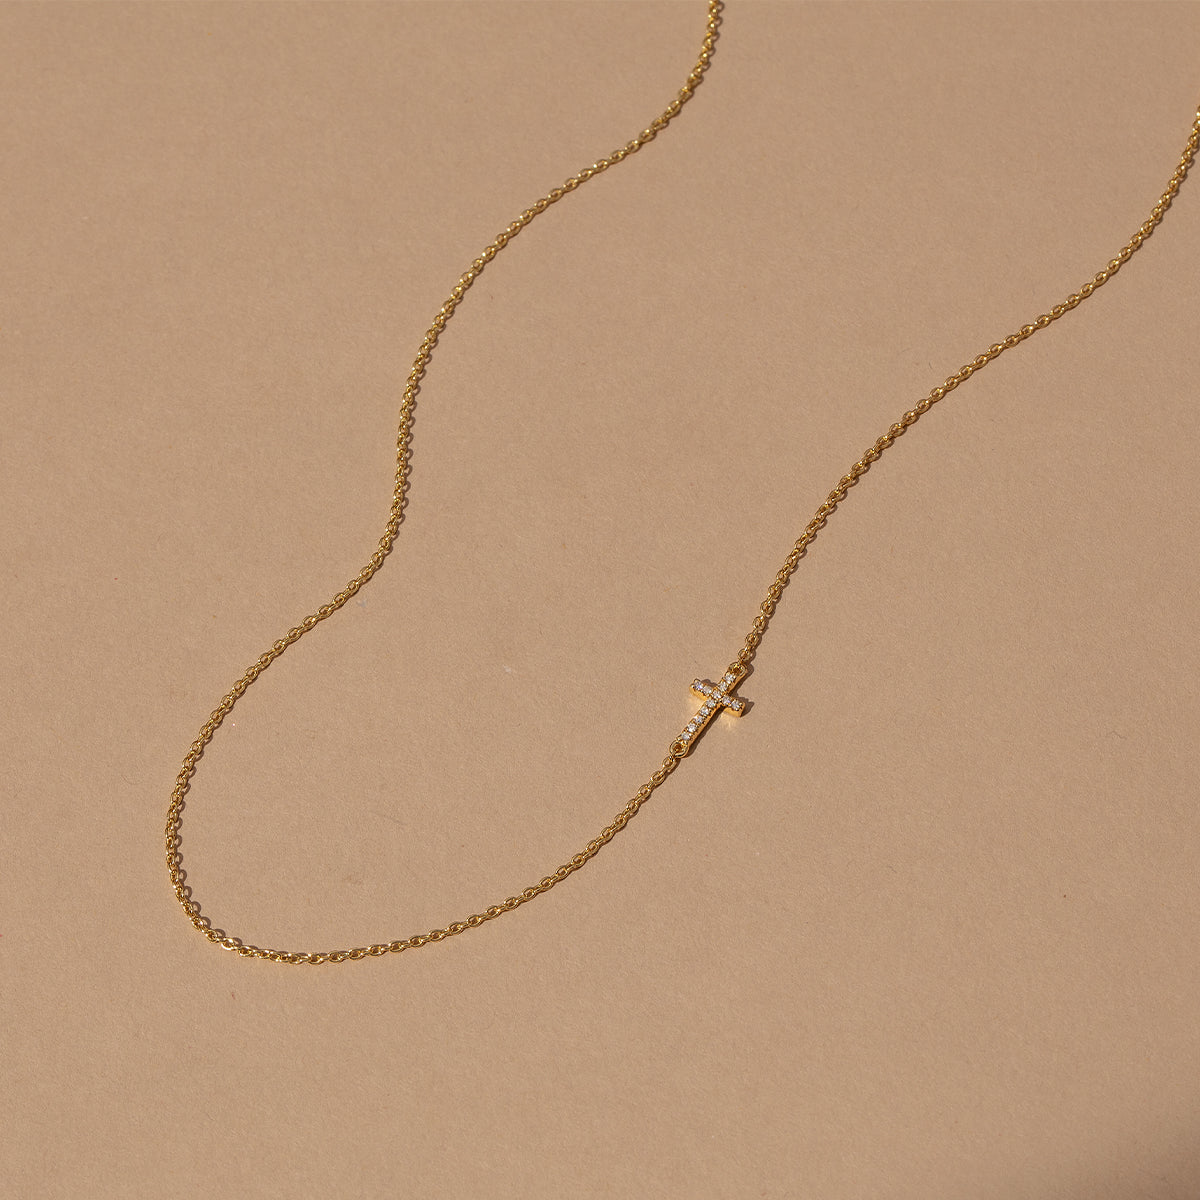 Anna's Layered Necklace with 18k Gold